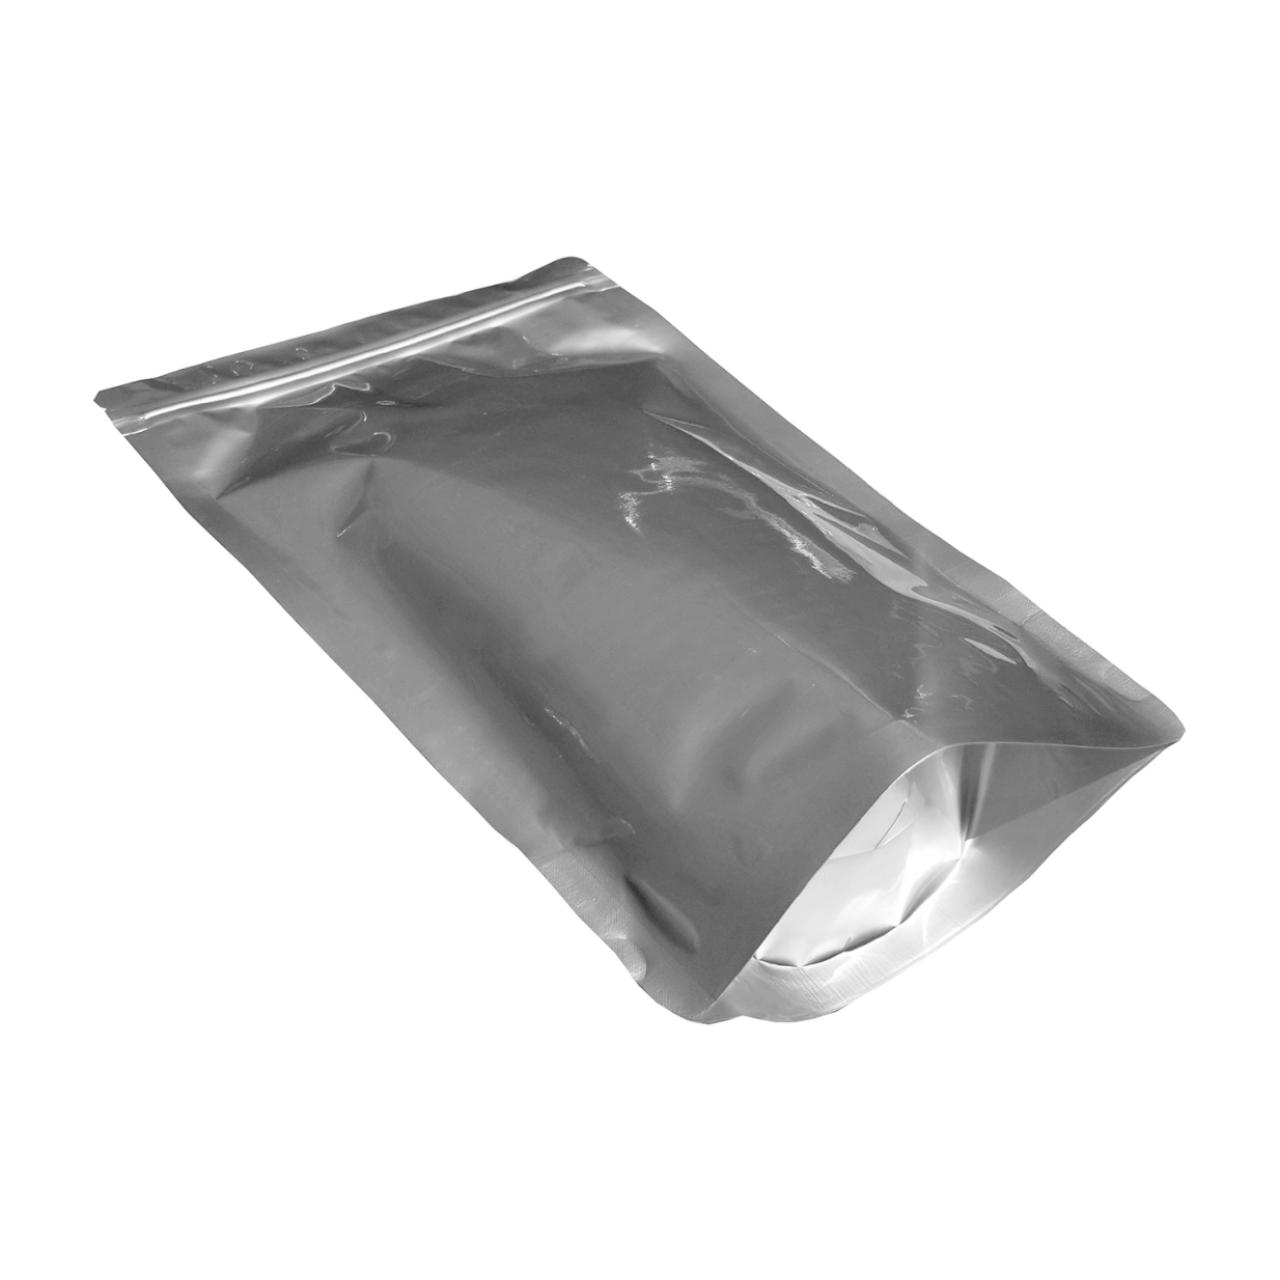 PABCK 100 Pieces White Metallic Mylar Foil Open Top Sealable Bags 3.1x4.7  inch Vacuum Heat Seal Pouches for Food Storage Packaging with Tear Notches